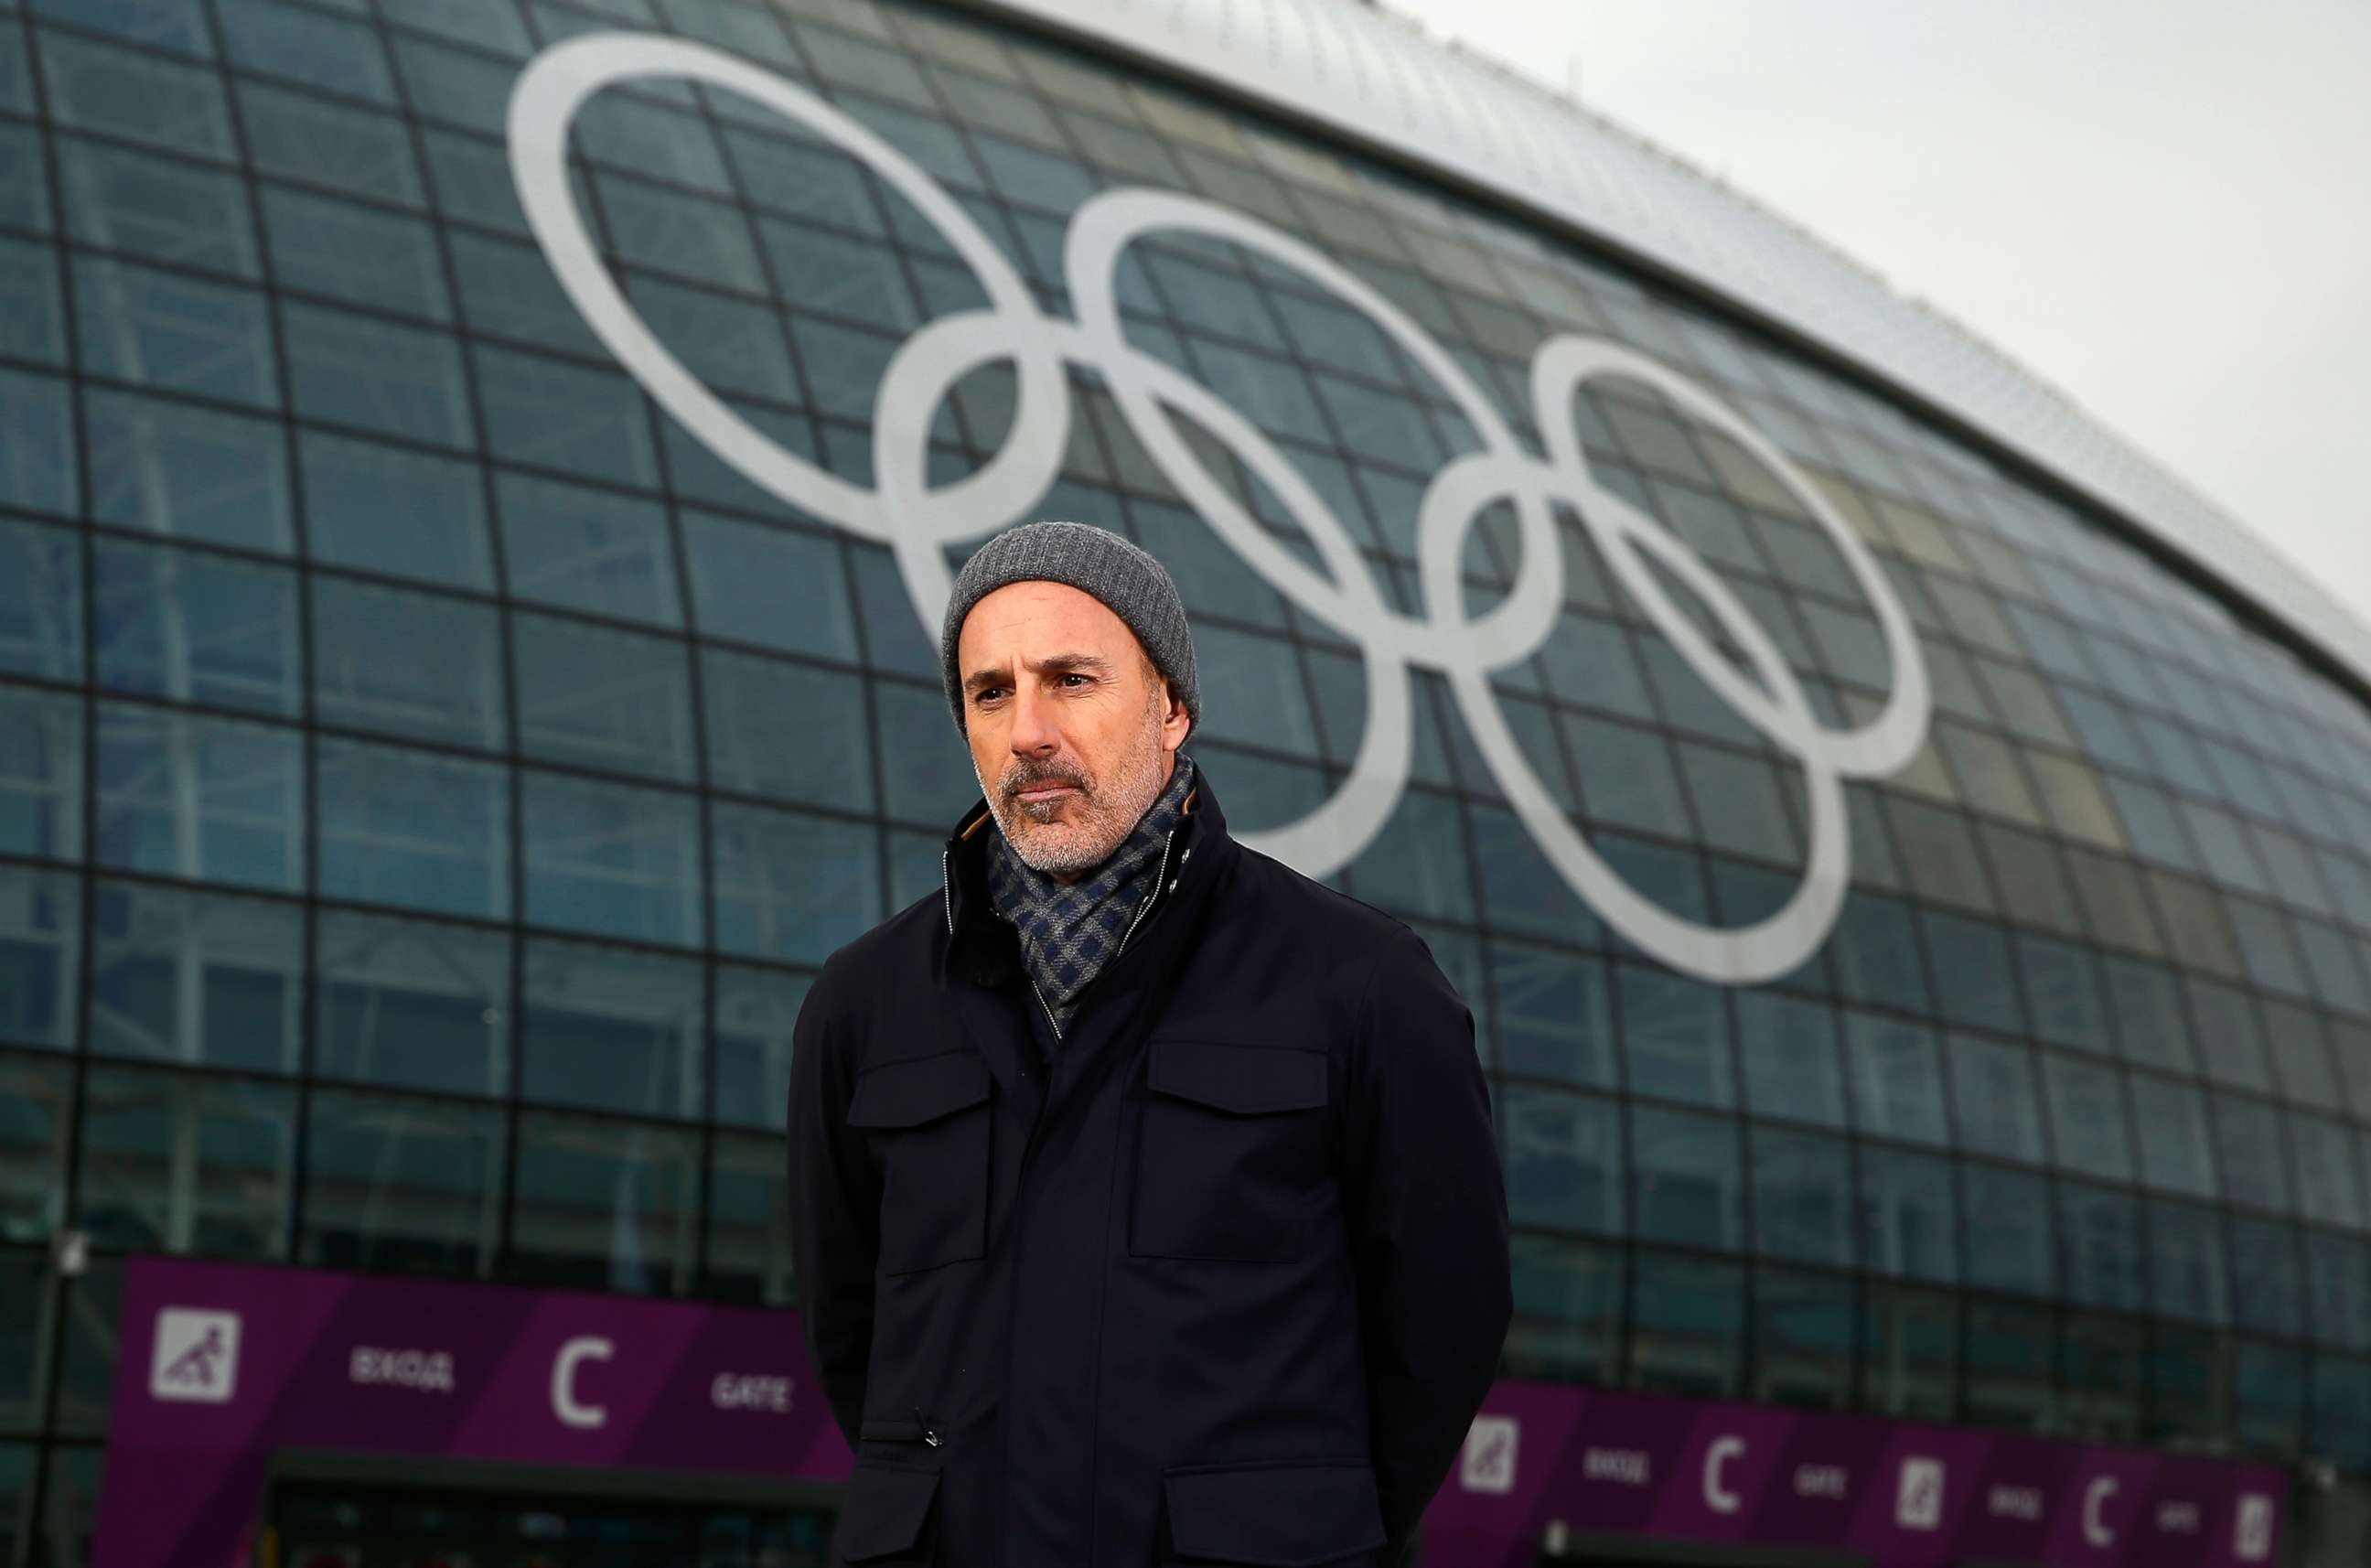 PHOTO: Matt Lauer reports for the NBC "Today" show in the Olympic Park ahead of the Sochi 2014 Winter Olympics, Feb. 5, 2014 in Sochi, Russia. 